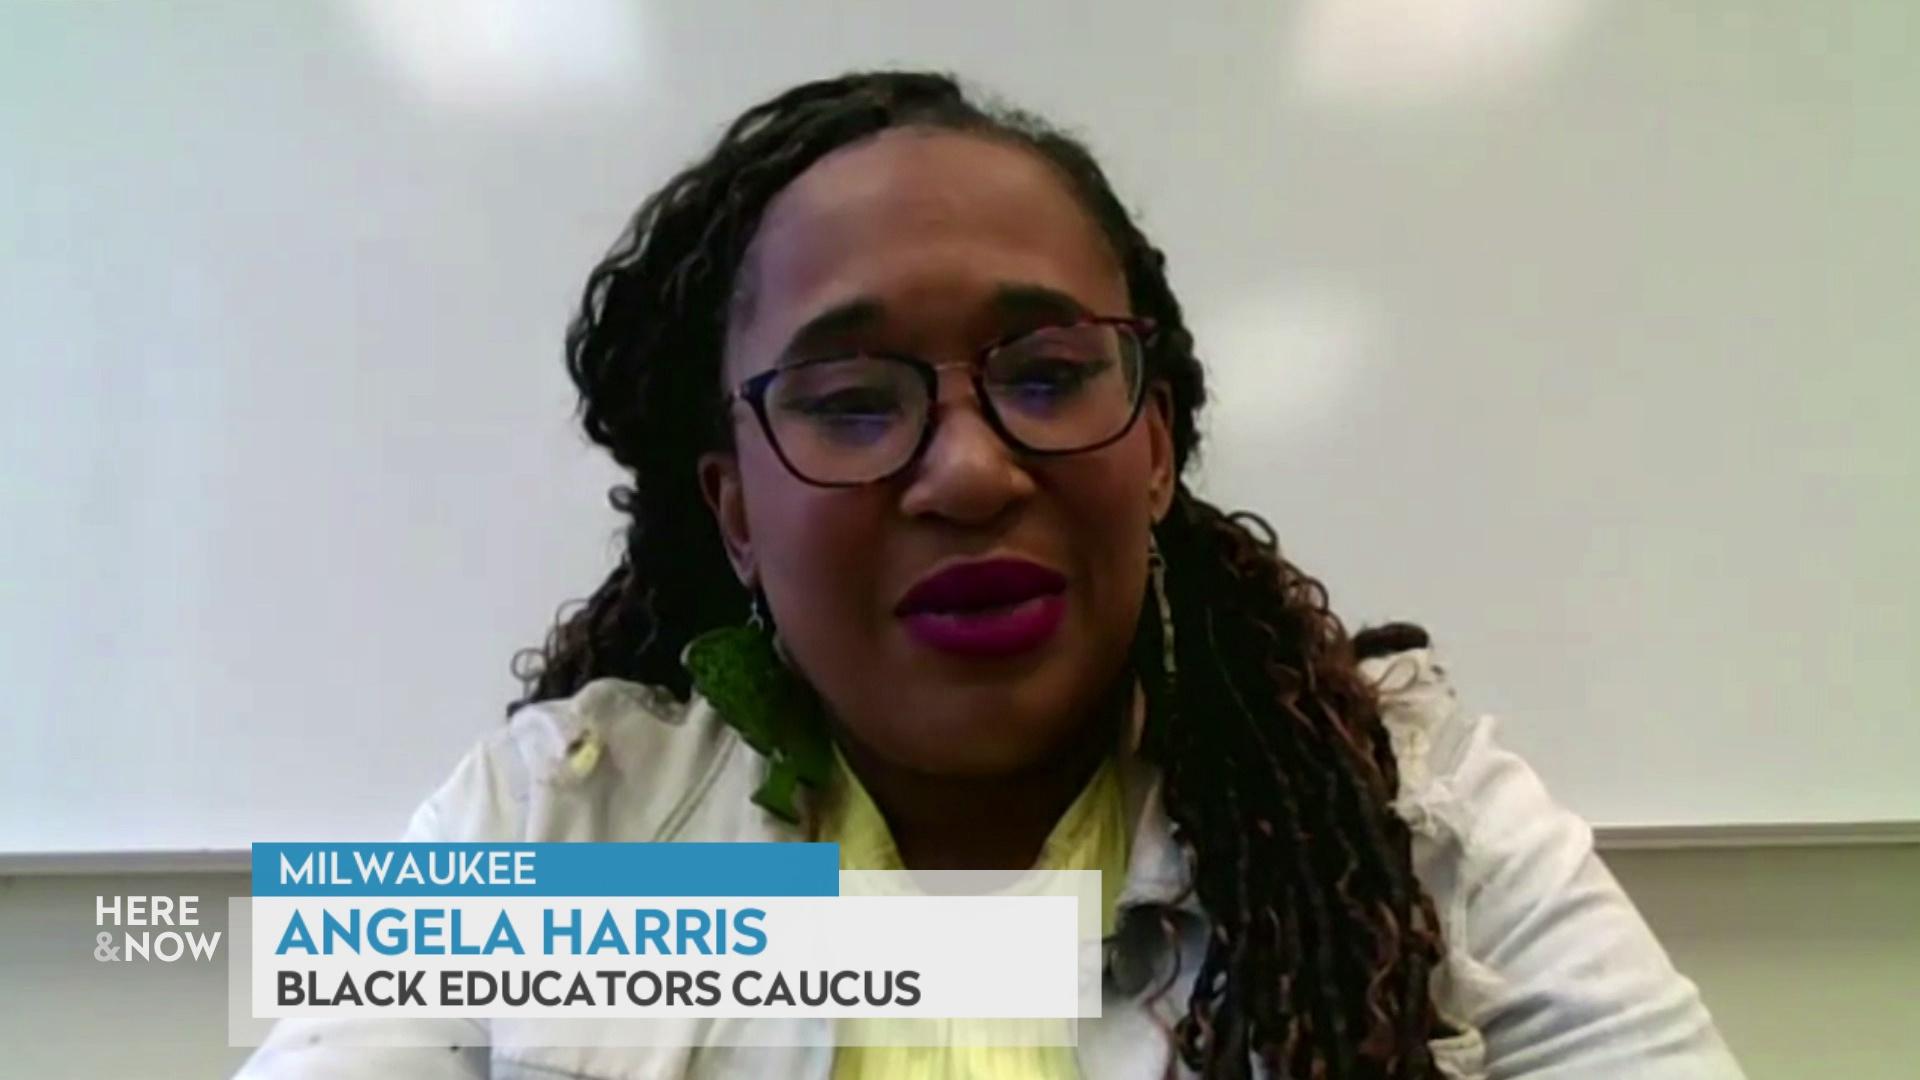 A still image from a video shows Angela Harris seated in front of a whiteboard with a graphic at bottom reading 'Milwaukee,' 'Angela Harris' and 'Black Educators Caucus.'